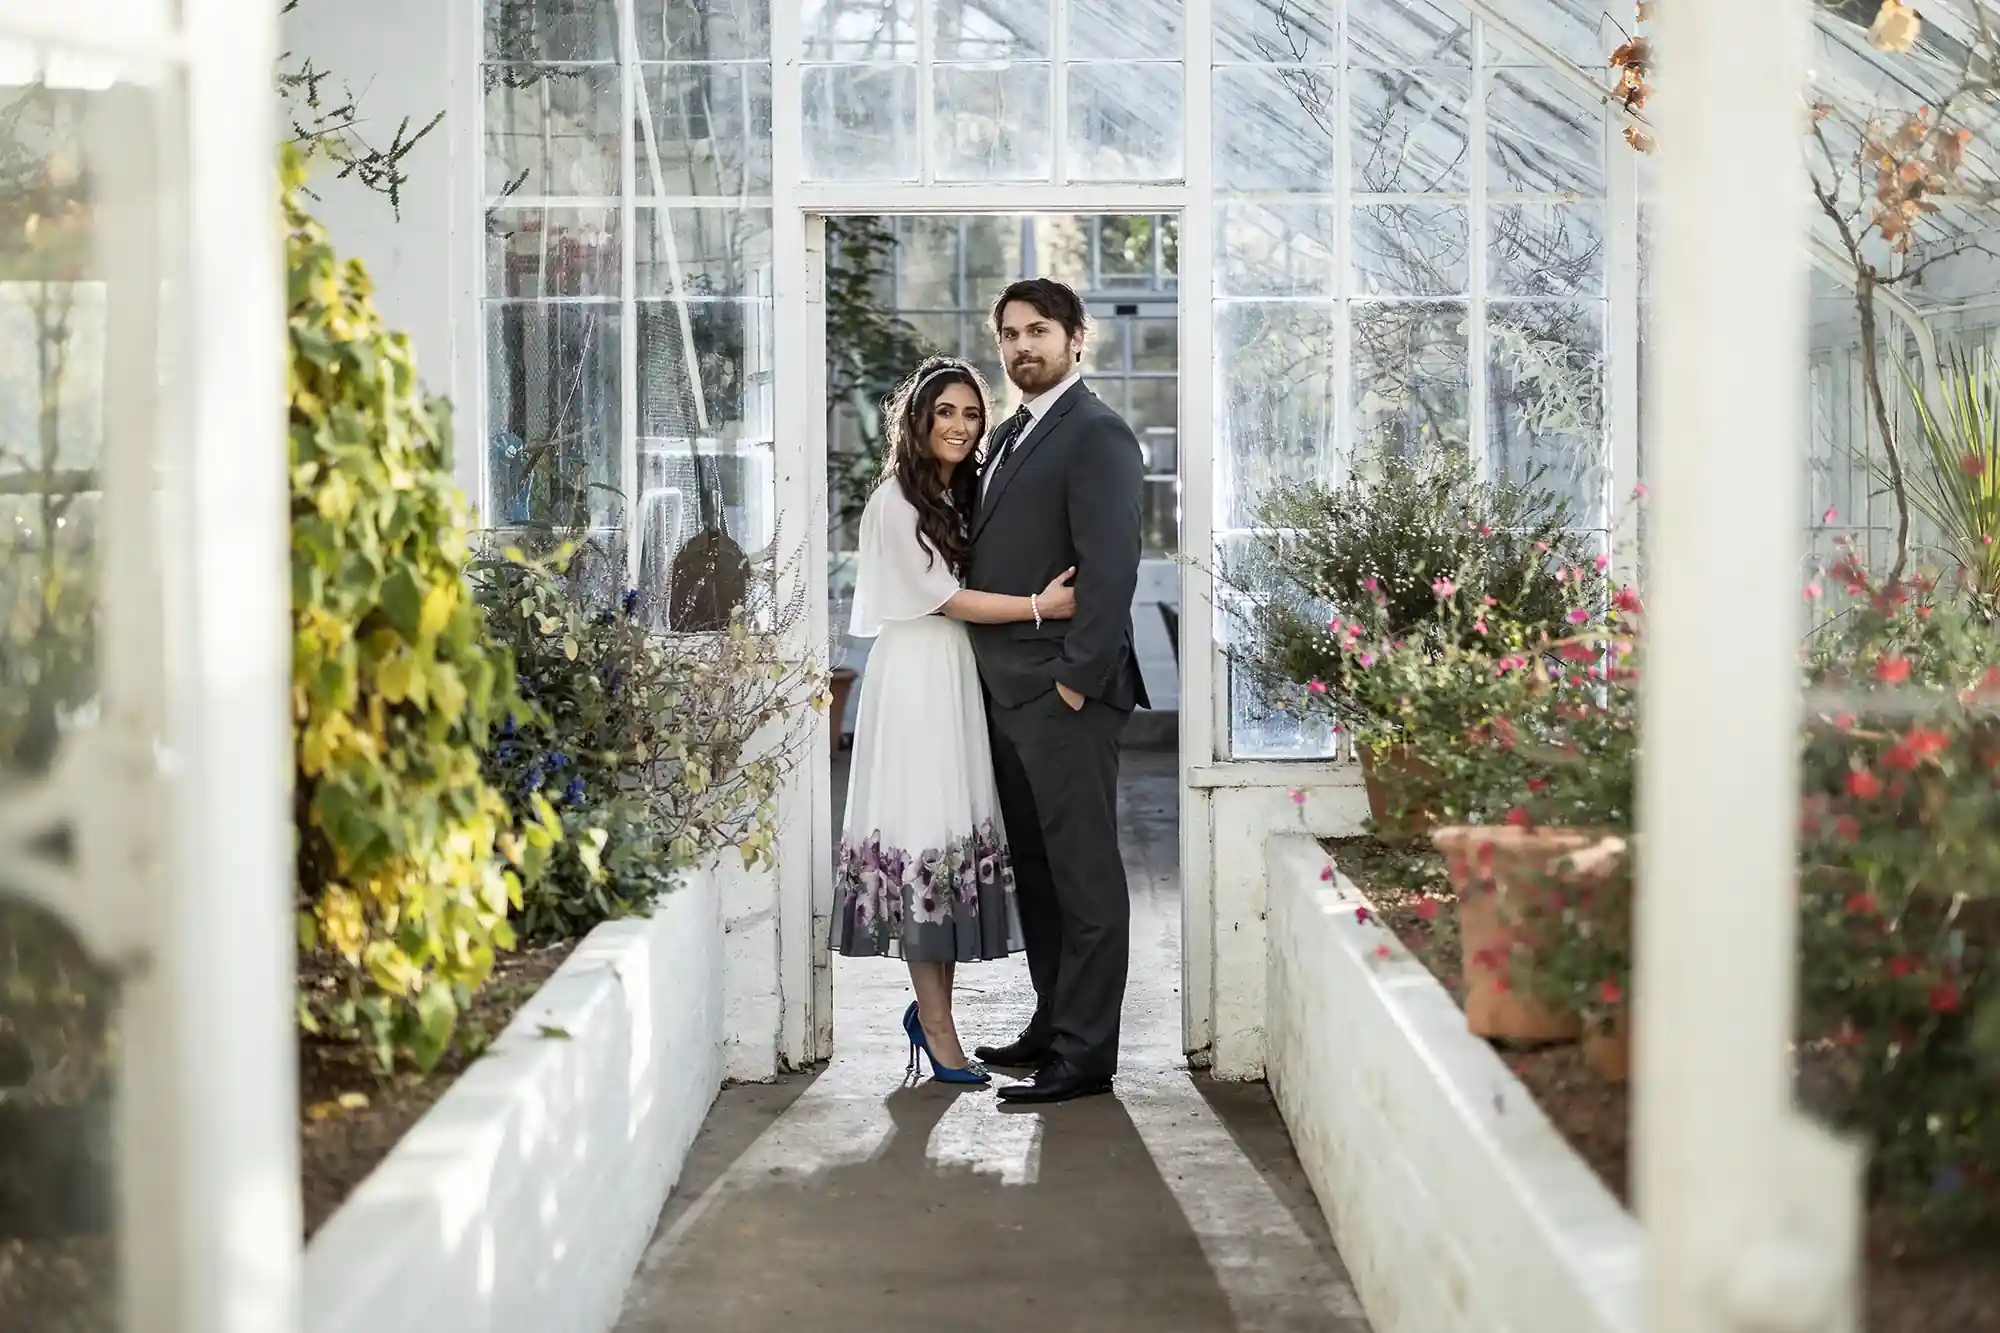 A couple embraces in a sunlit greenhouse, surrounded by lush plants, with the man in a gray suit and the woman in a floral dress.